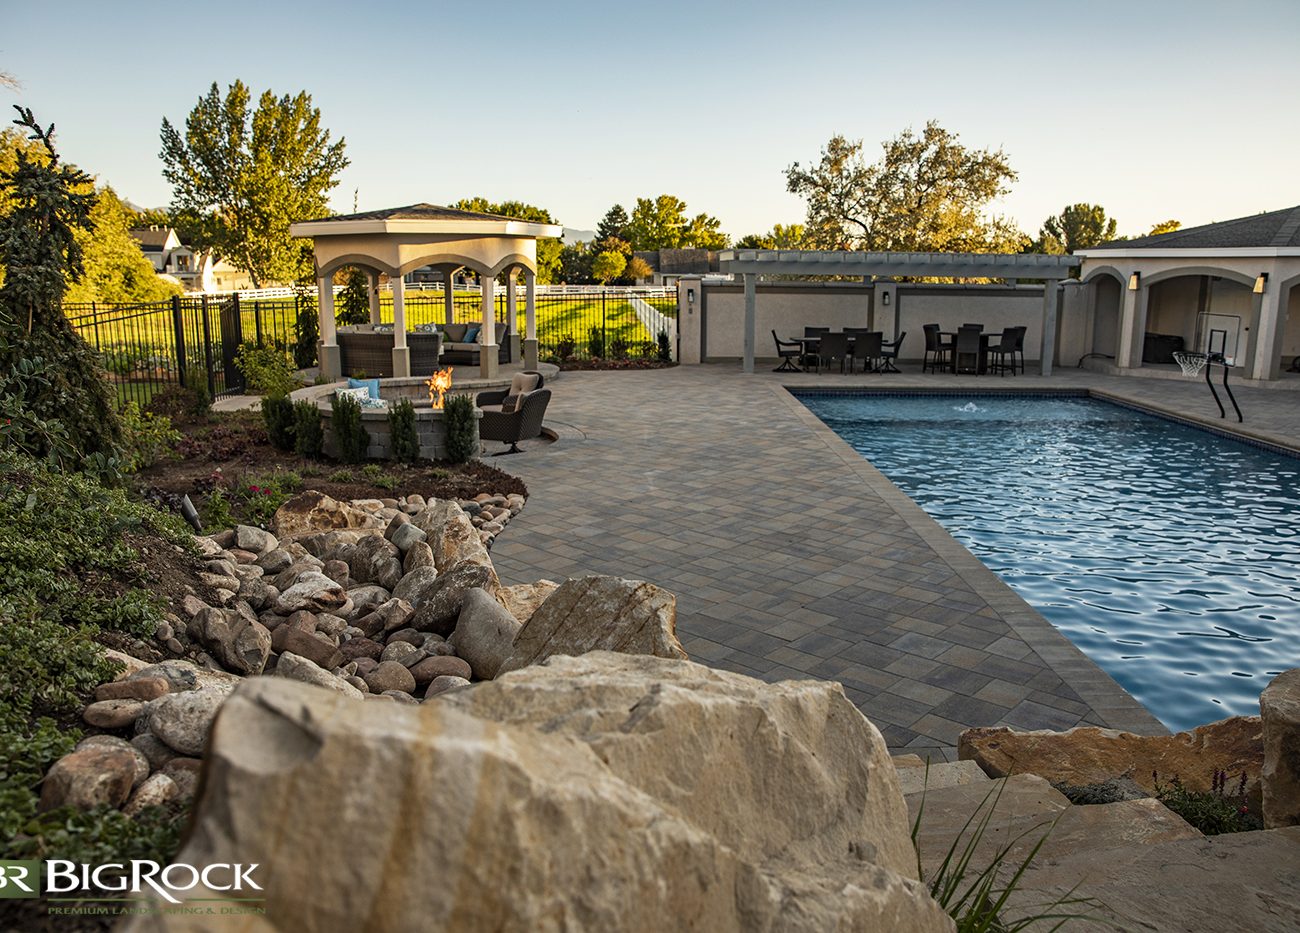 Having a firepit, pergola, pool and beautiful gardens in your residential landscaping is possible. Big Rock Premium Landscaping can make all your landscaping dreams come true.